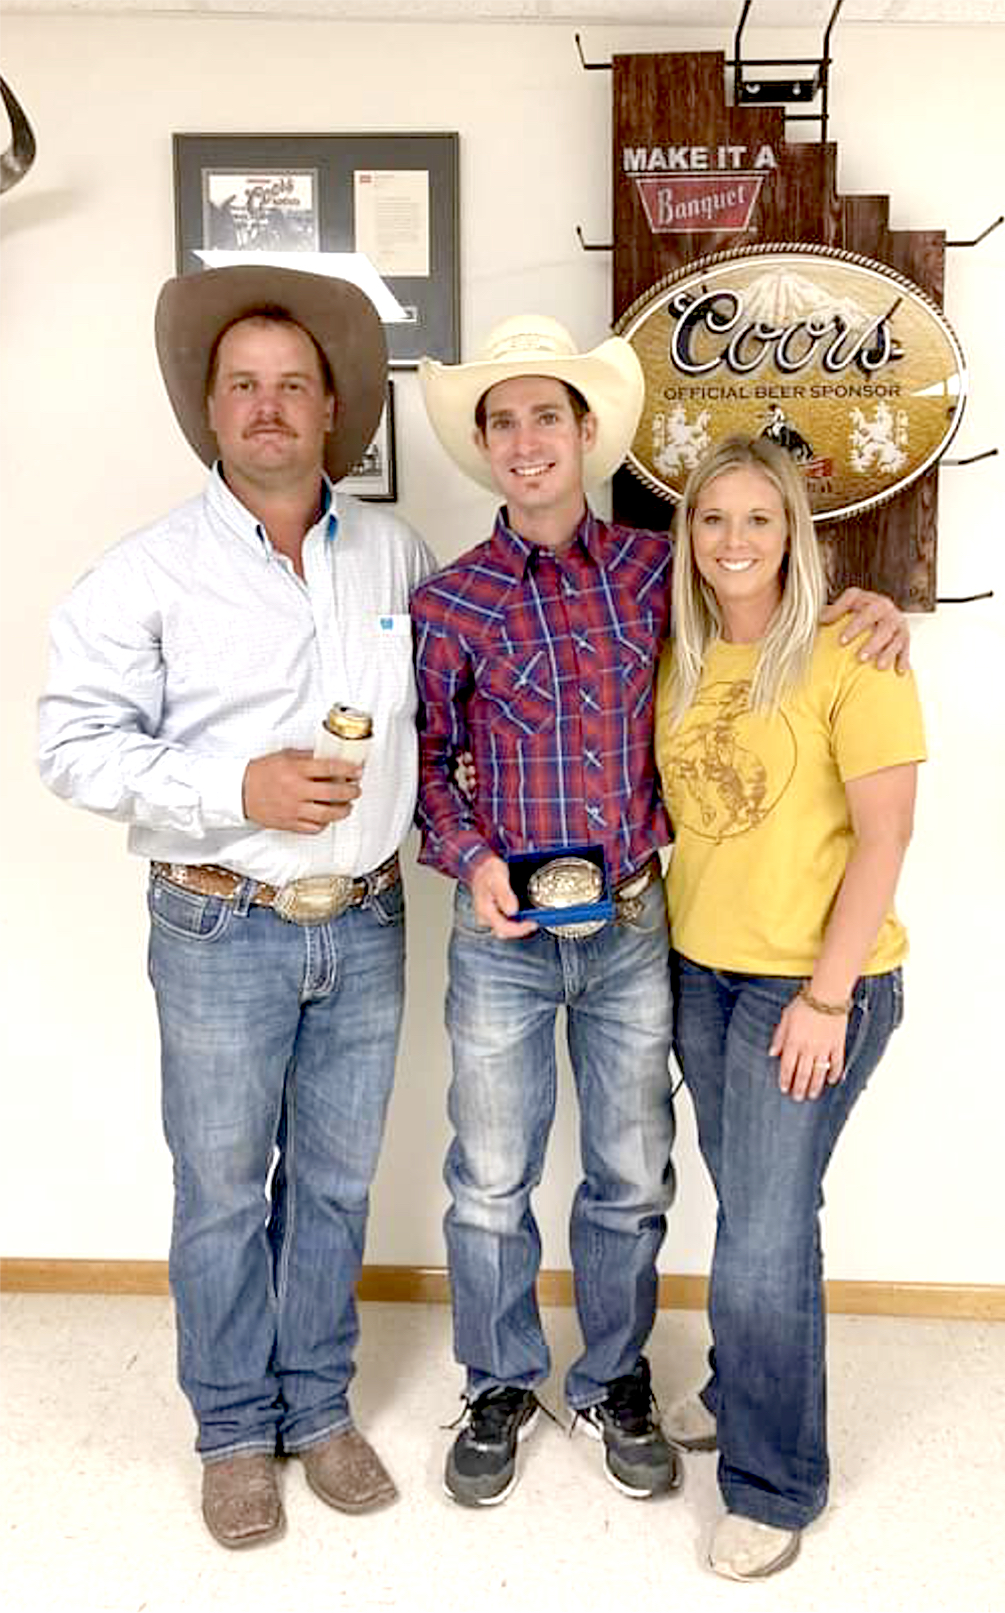 PICTURED with the bull rider champion at the Richard Schleicher Memorial Bull Riding event held on Saturday, September 24th are Trey Kerner, belt buckle winner Chase Hamlin and Jimi Kerner of Kerner Bucking Bulls, Brule, Neb.